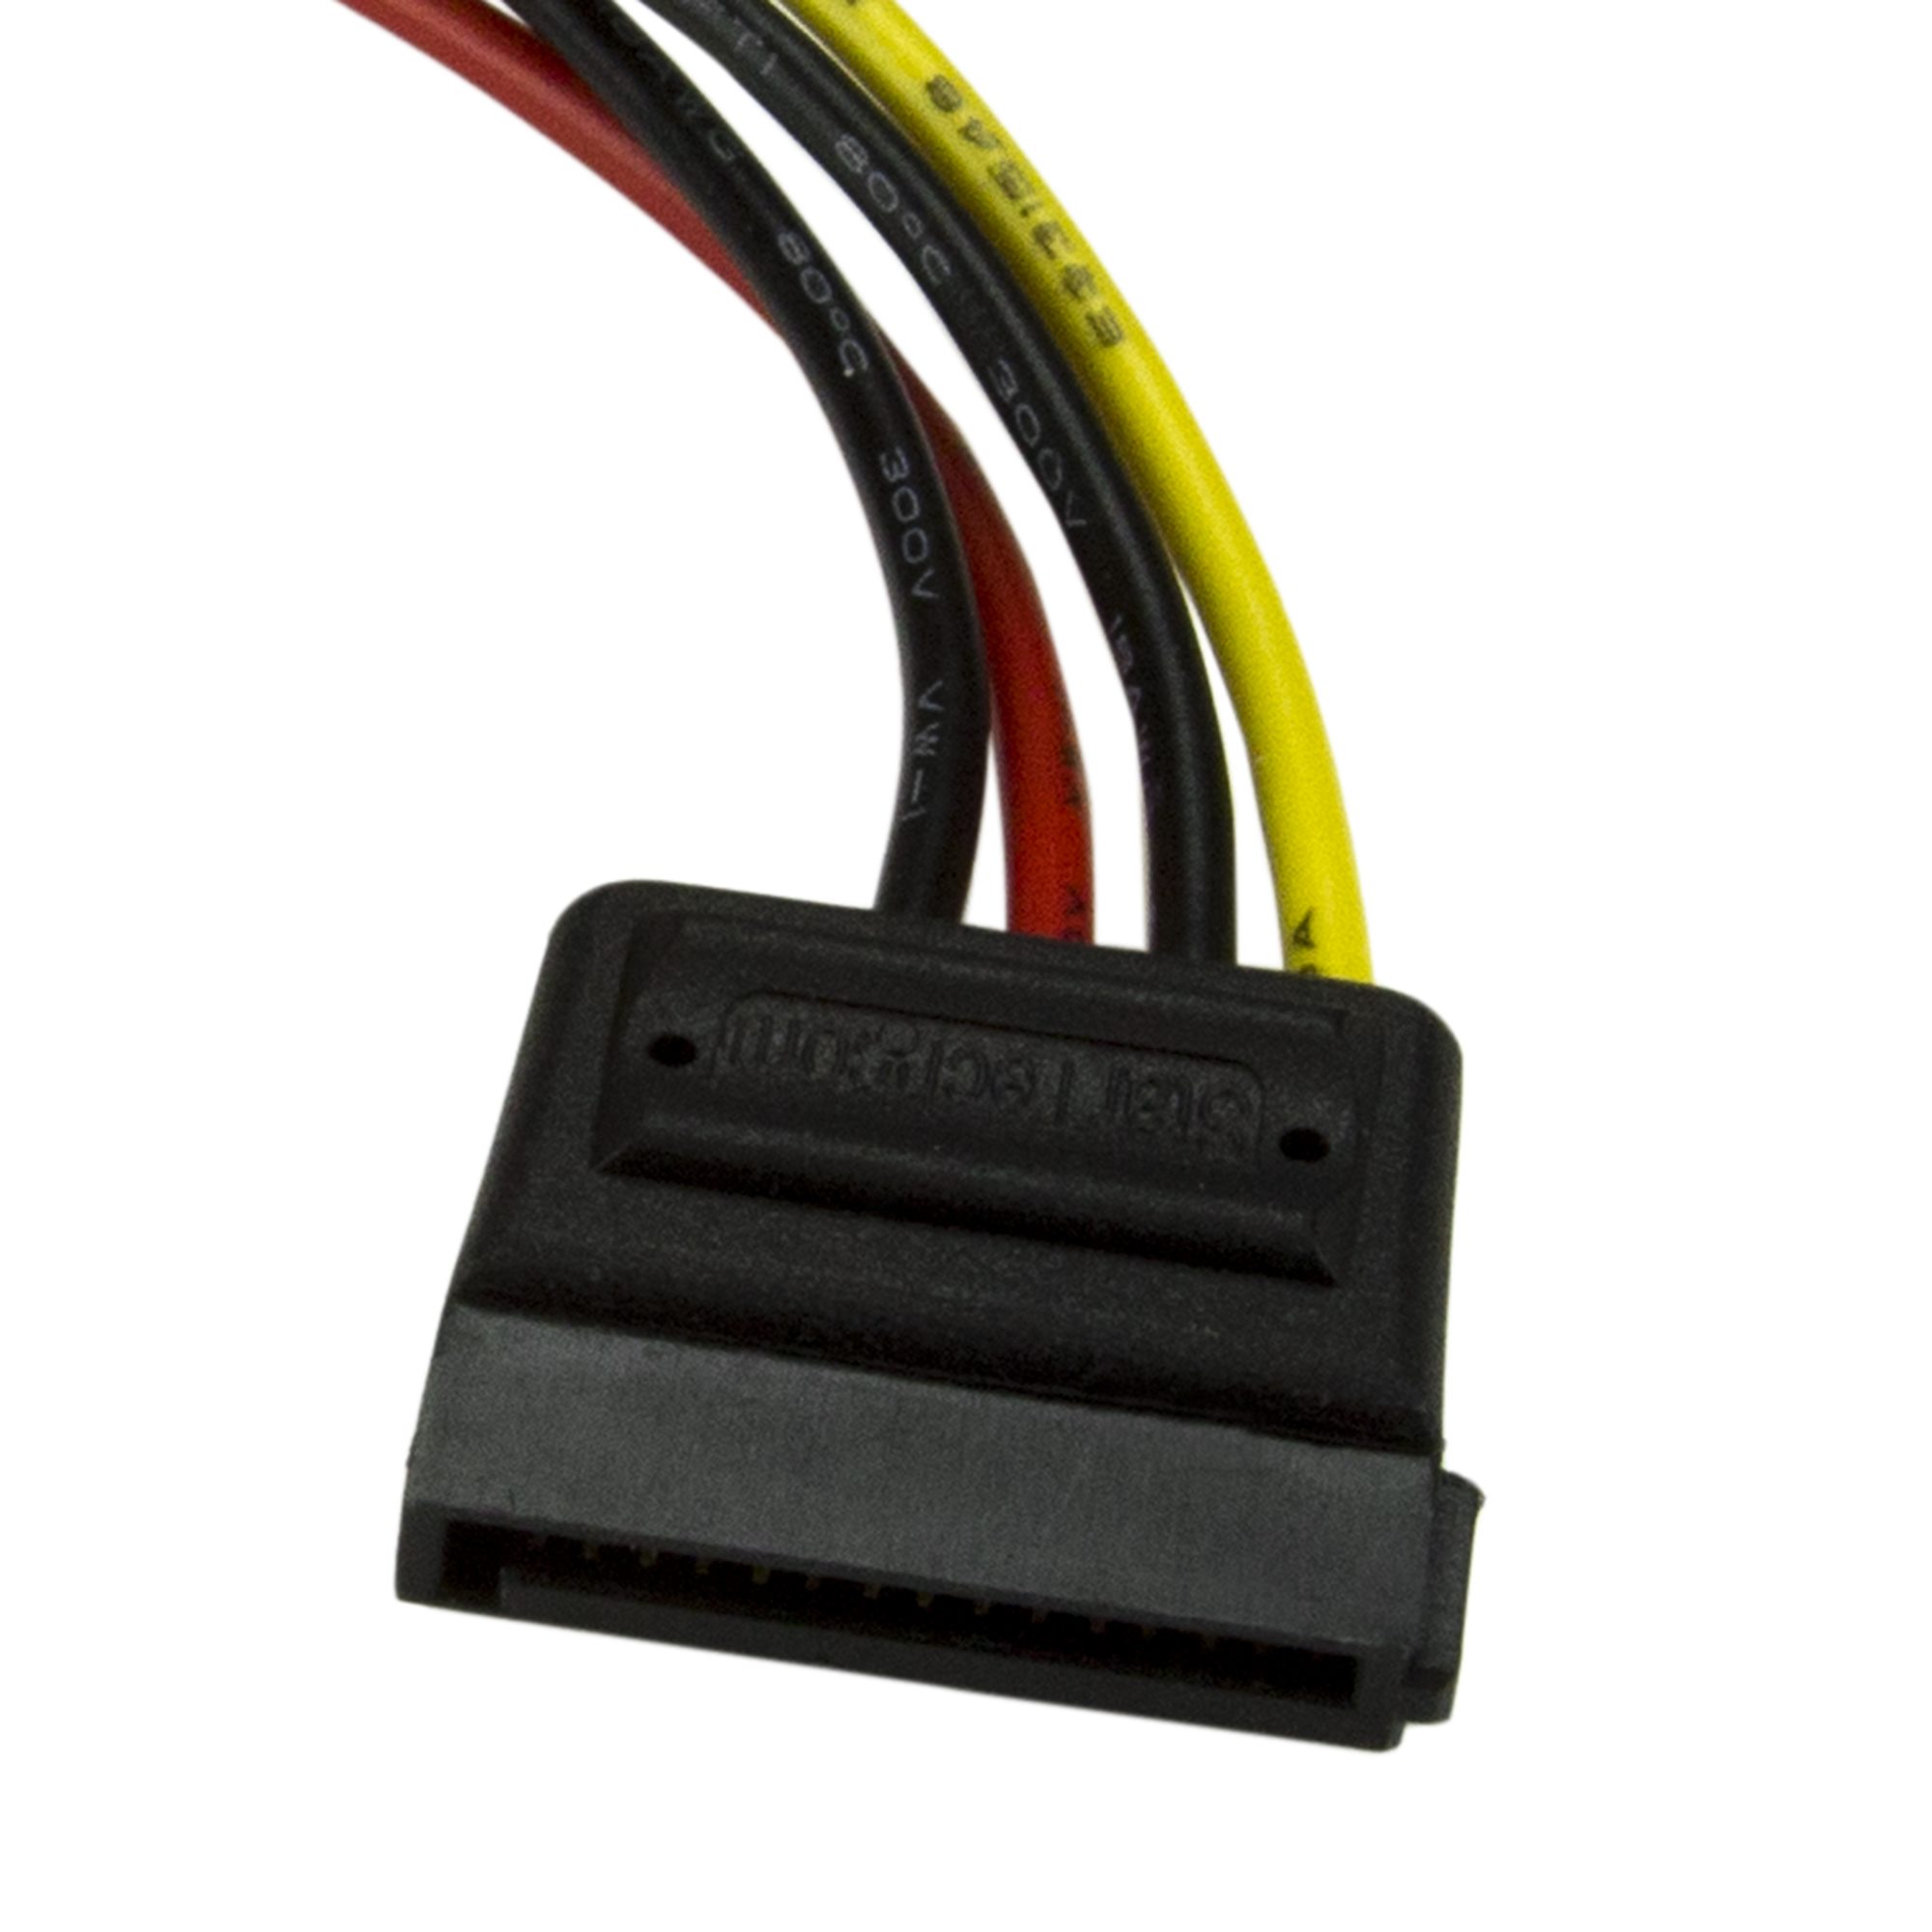 LP4 to SATA Power Adapter StarTech.com 6in 4 Pin LP4 to Left Angle SATA Power Cable Adapter 